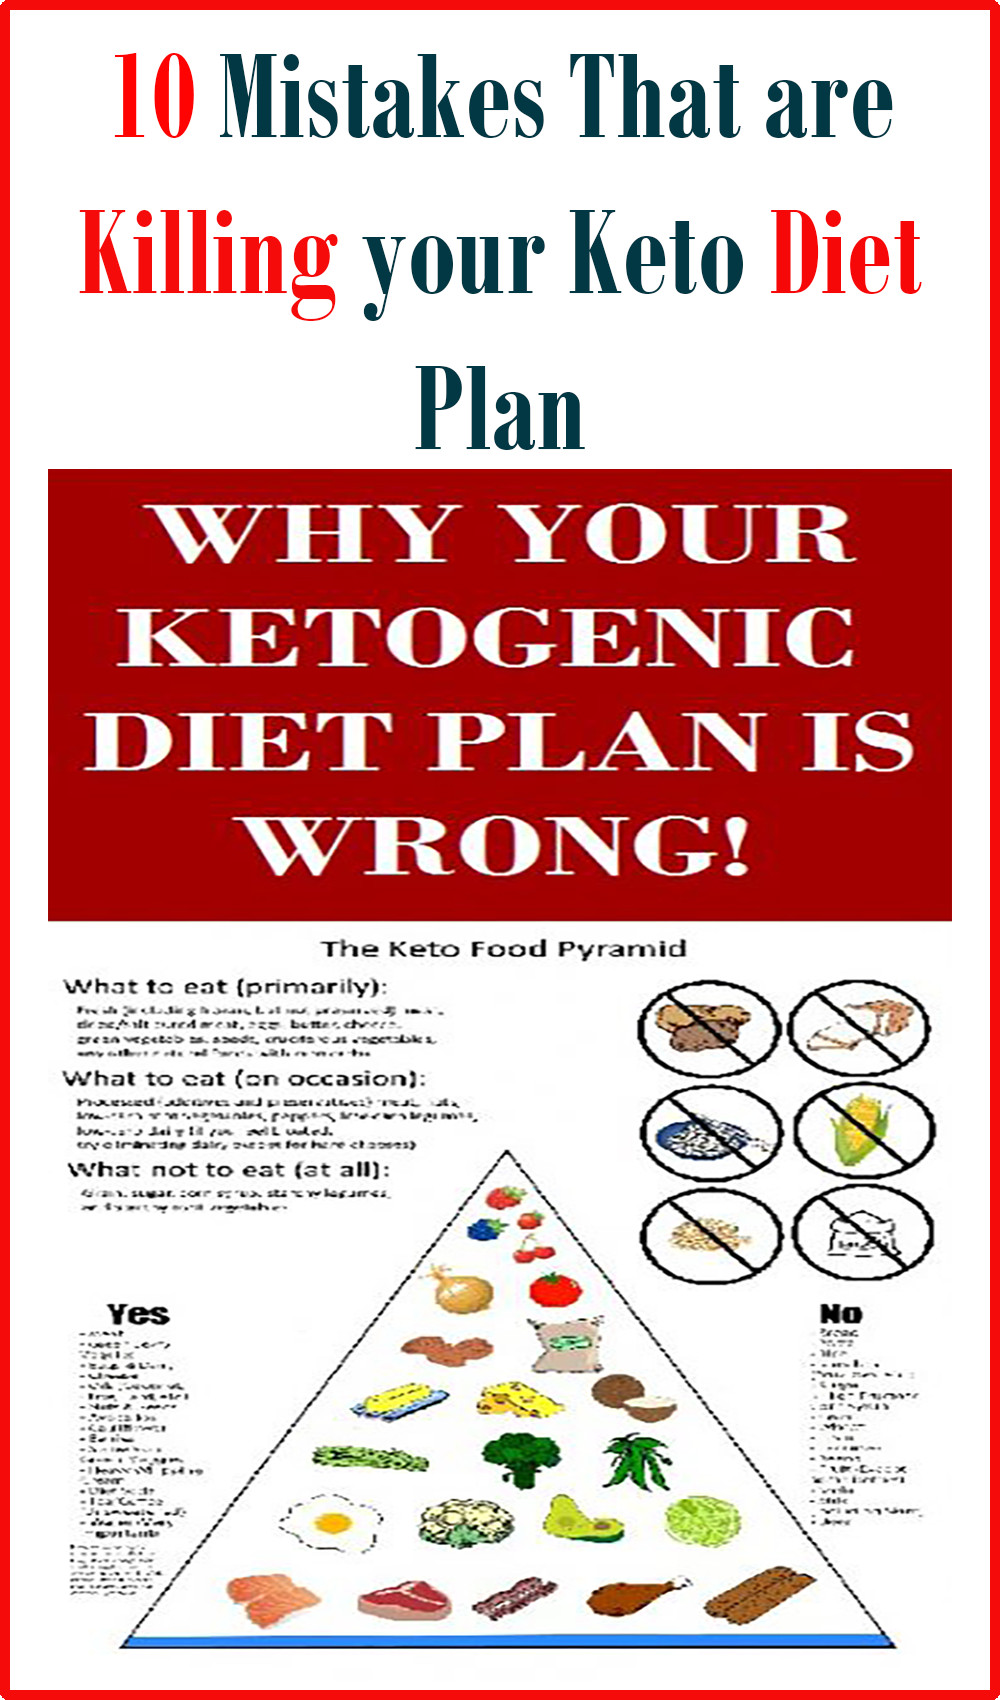 Keto Diet And Exercise
 Your Ketogenic Diet Plan is Wrong 10 Mistakes Killing